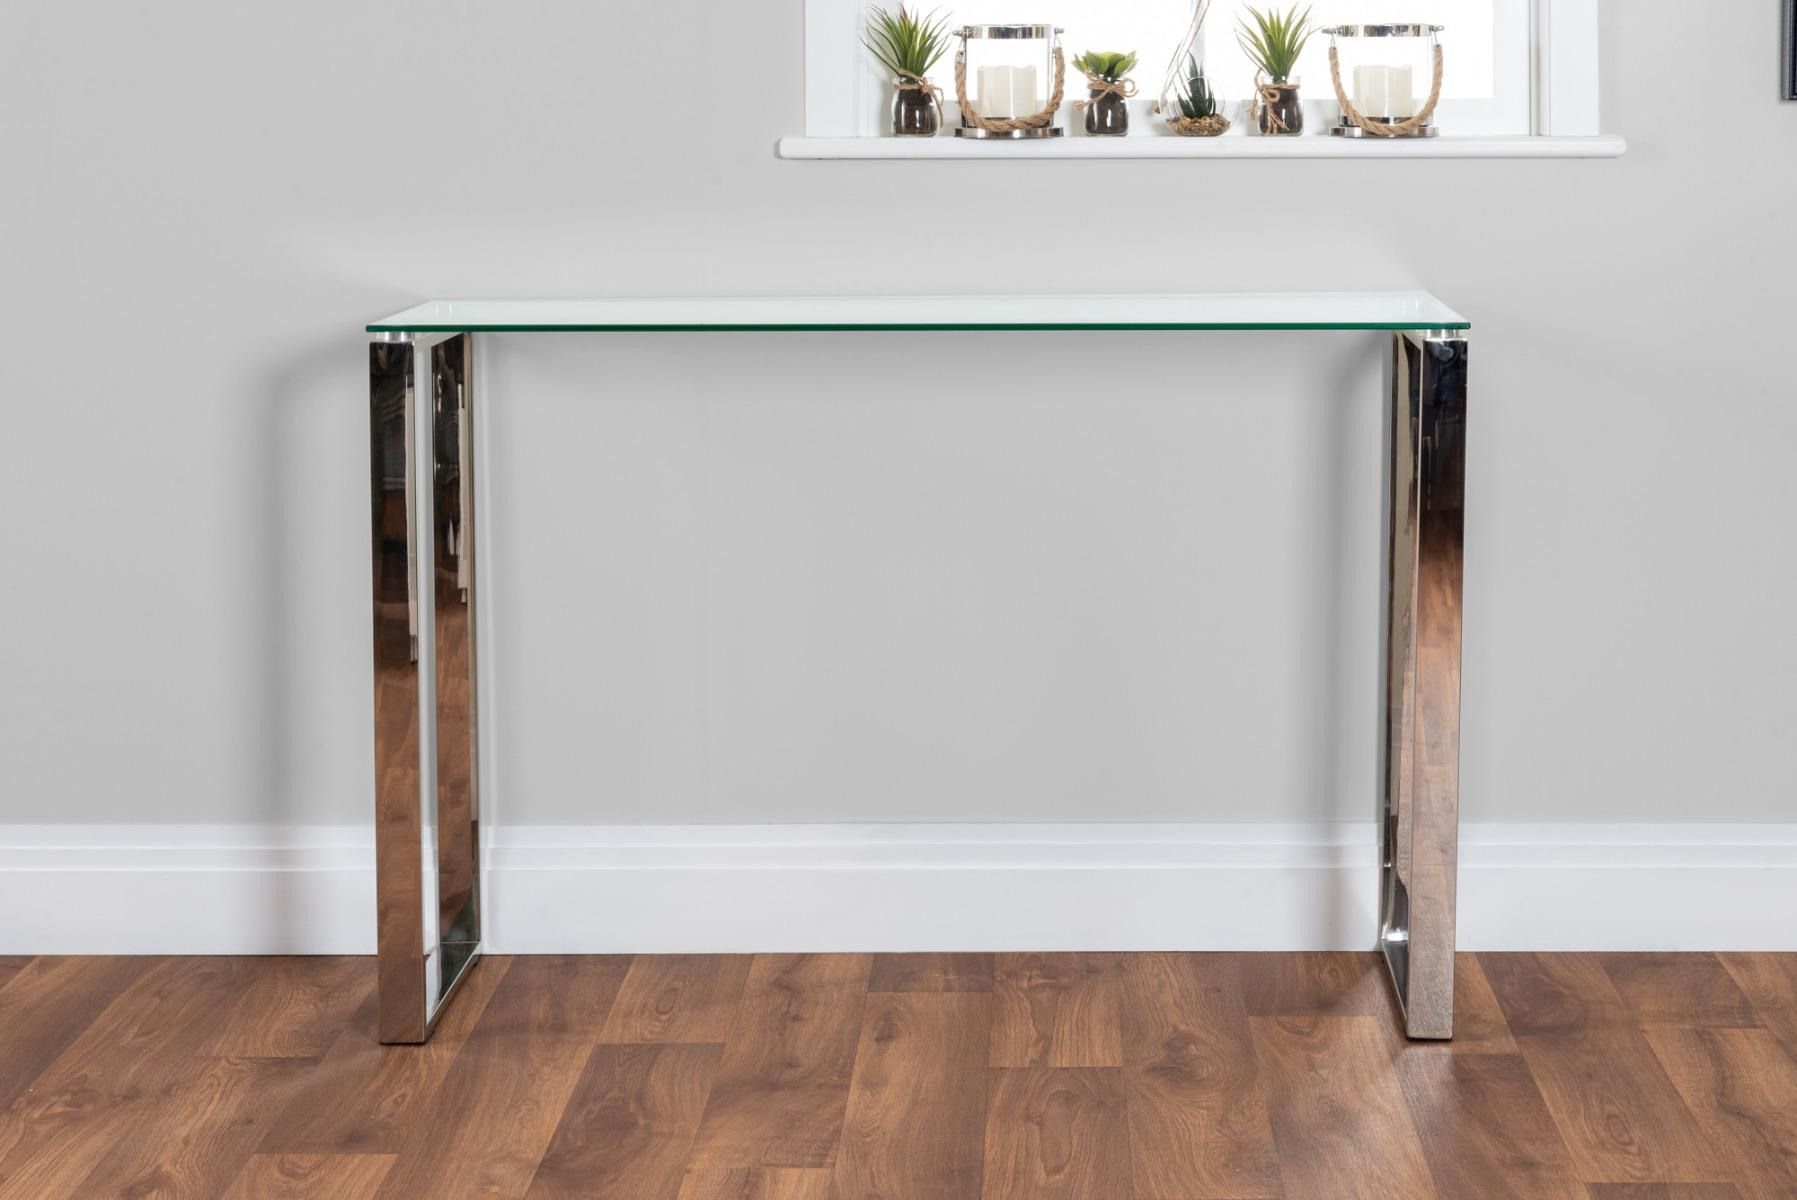 Modern Glass & Chrome Console Table | Furniturebox Throughout Geometric Glass Modern Console Tables (View 15 of 20)